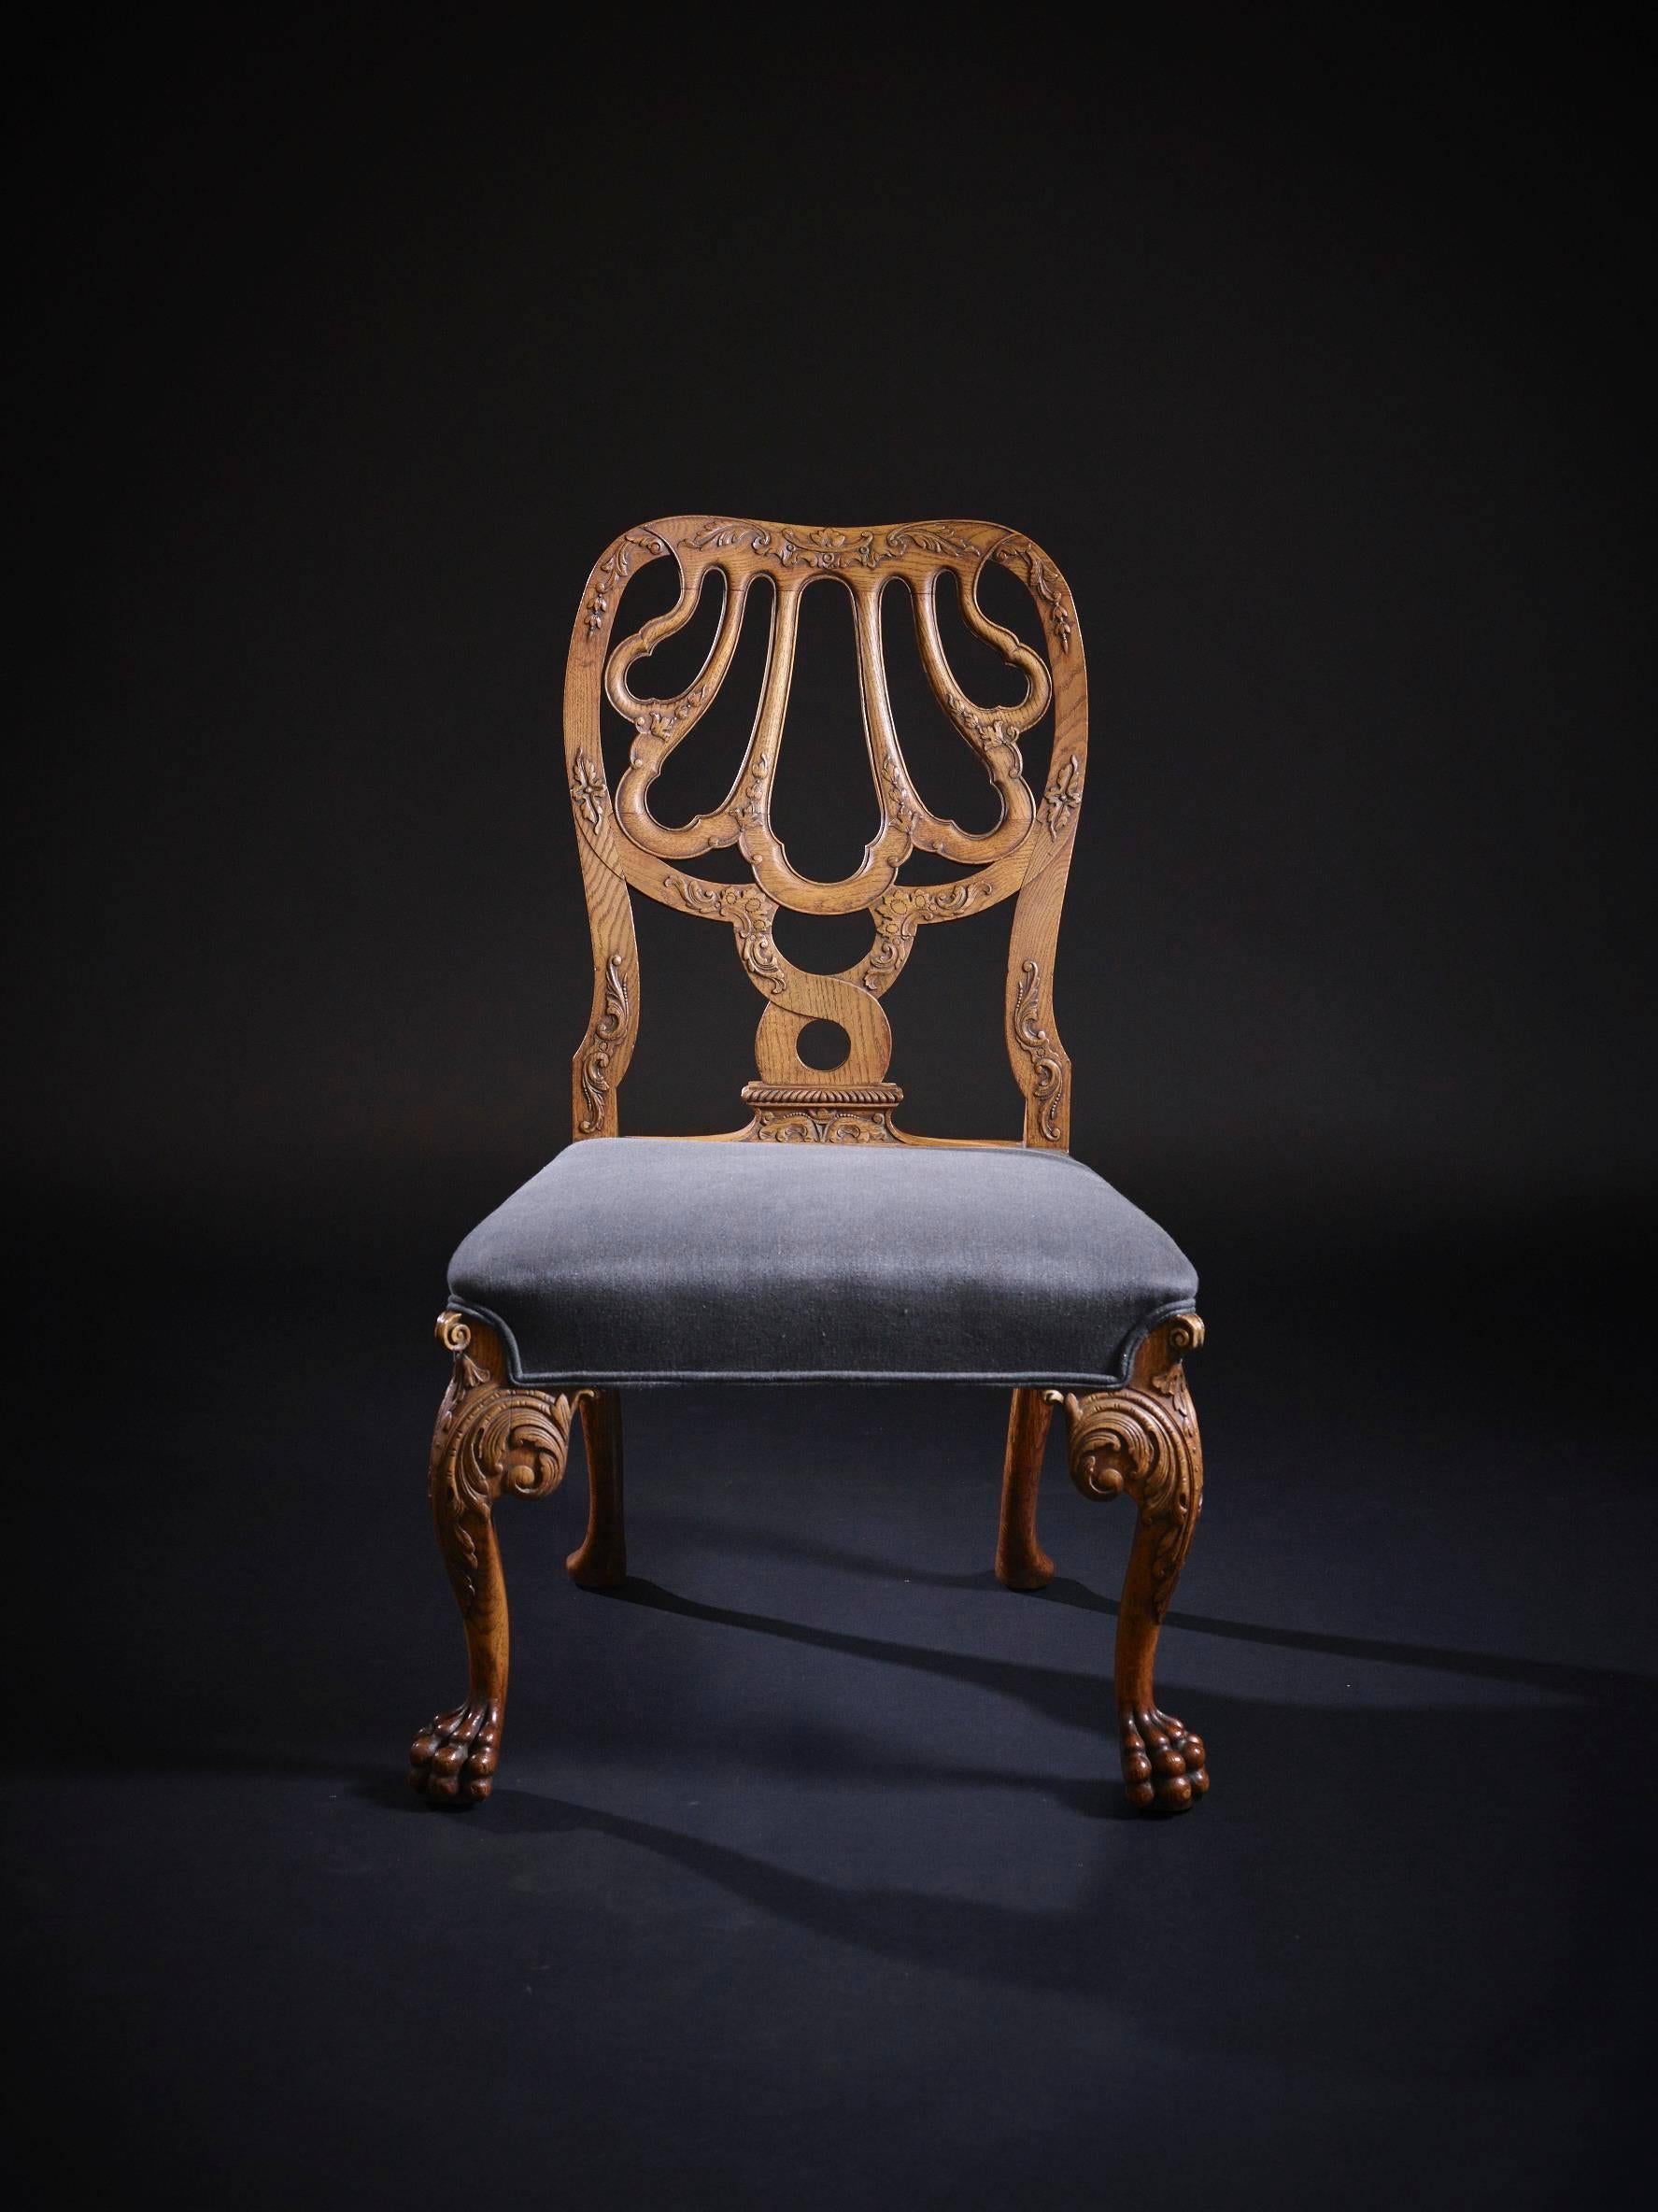 A good quality 19th century George II style English carved and joined oak side chair, after a design attributed to Giles Grendy (1693-1780). The original design for this chair circa 1745 and more commonly found in walnut. While not a period chair,